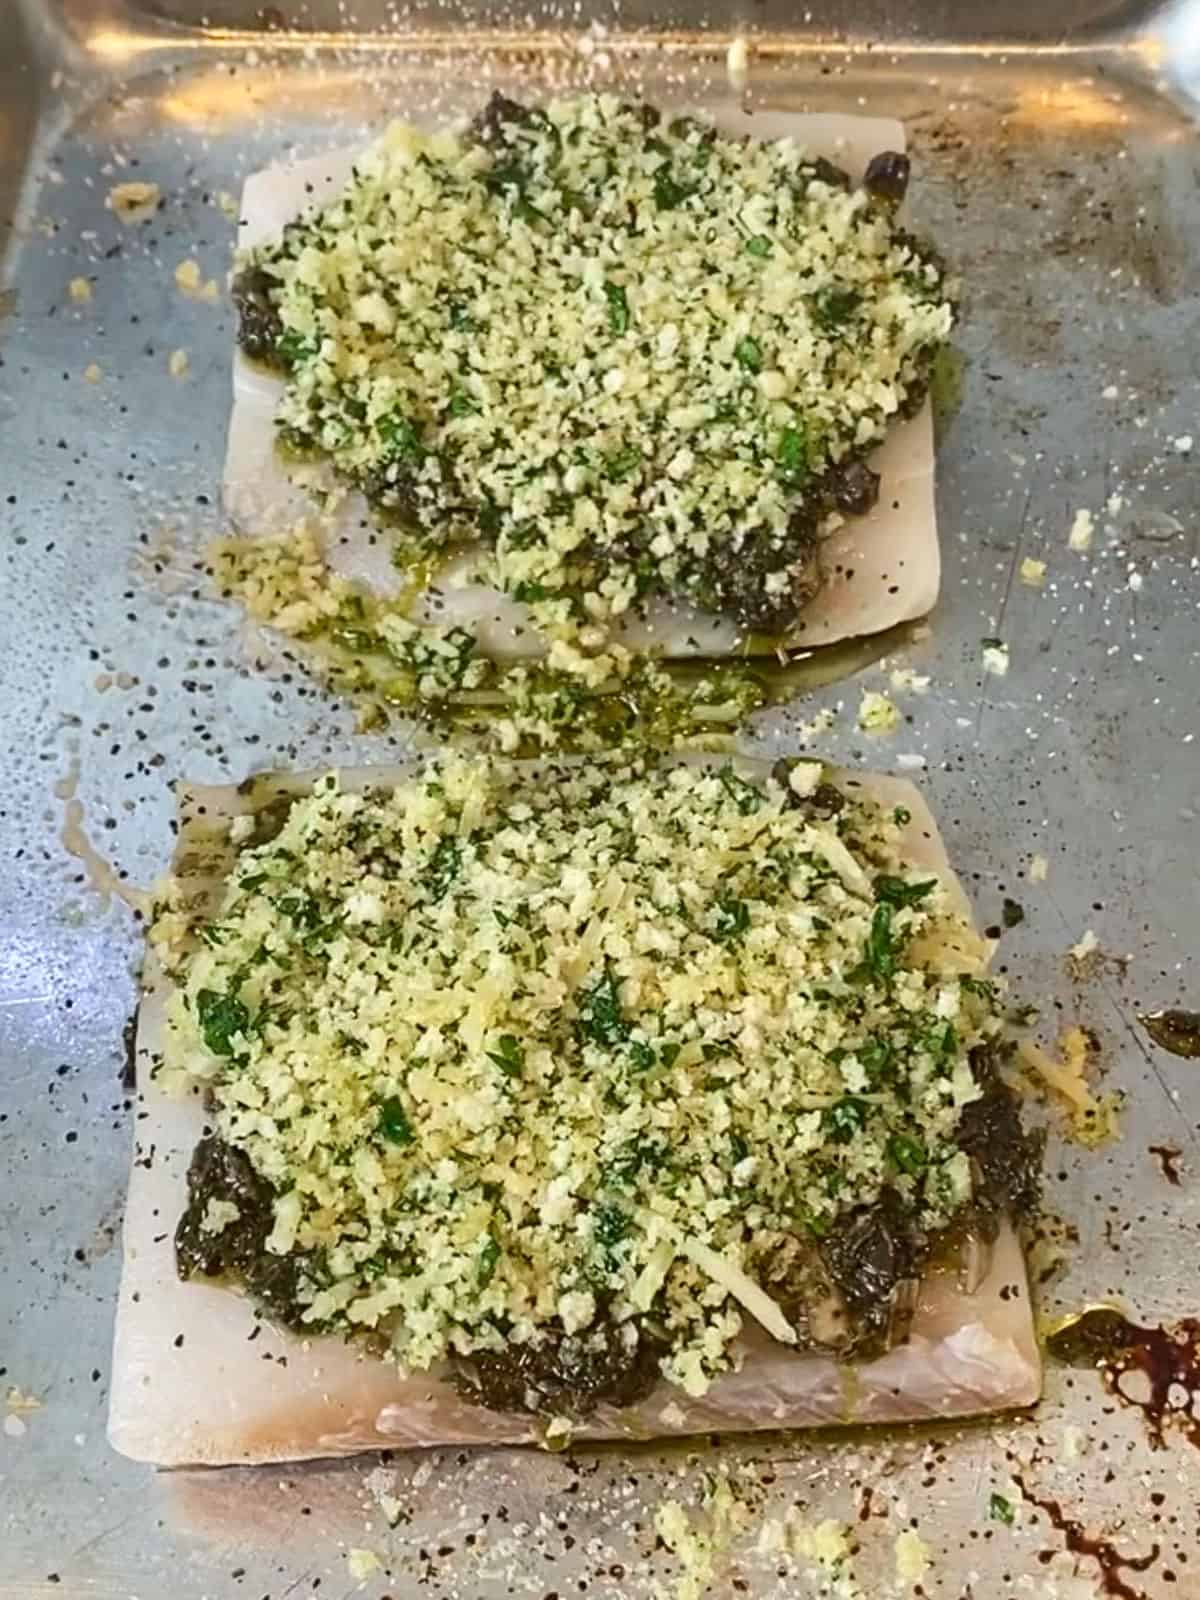 Layer the panko mixture on top of the pesto halibut and gently press down so the panko sticks.